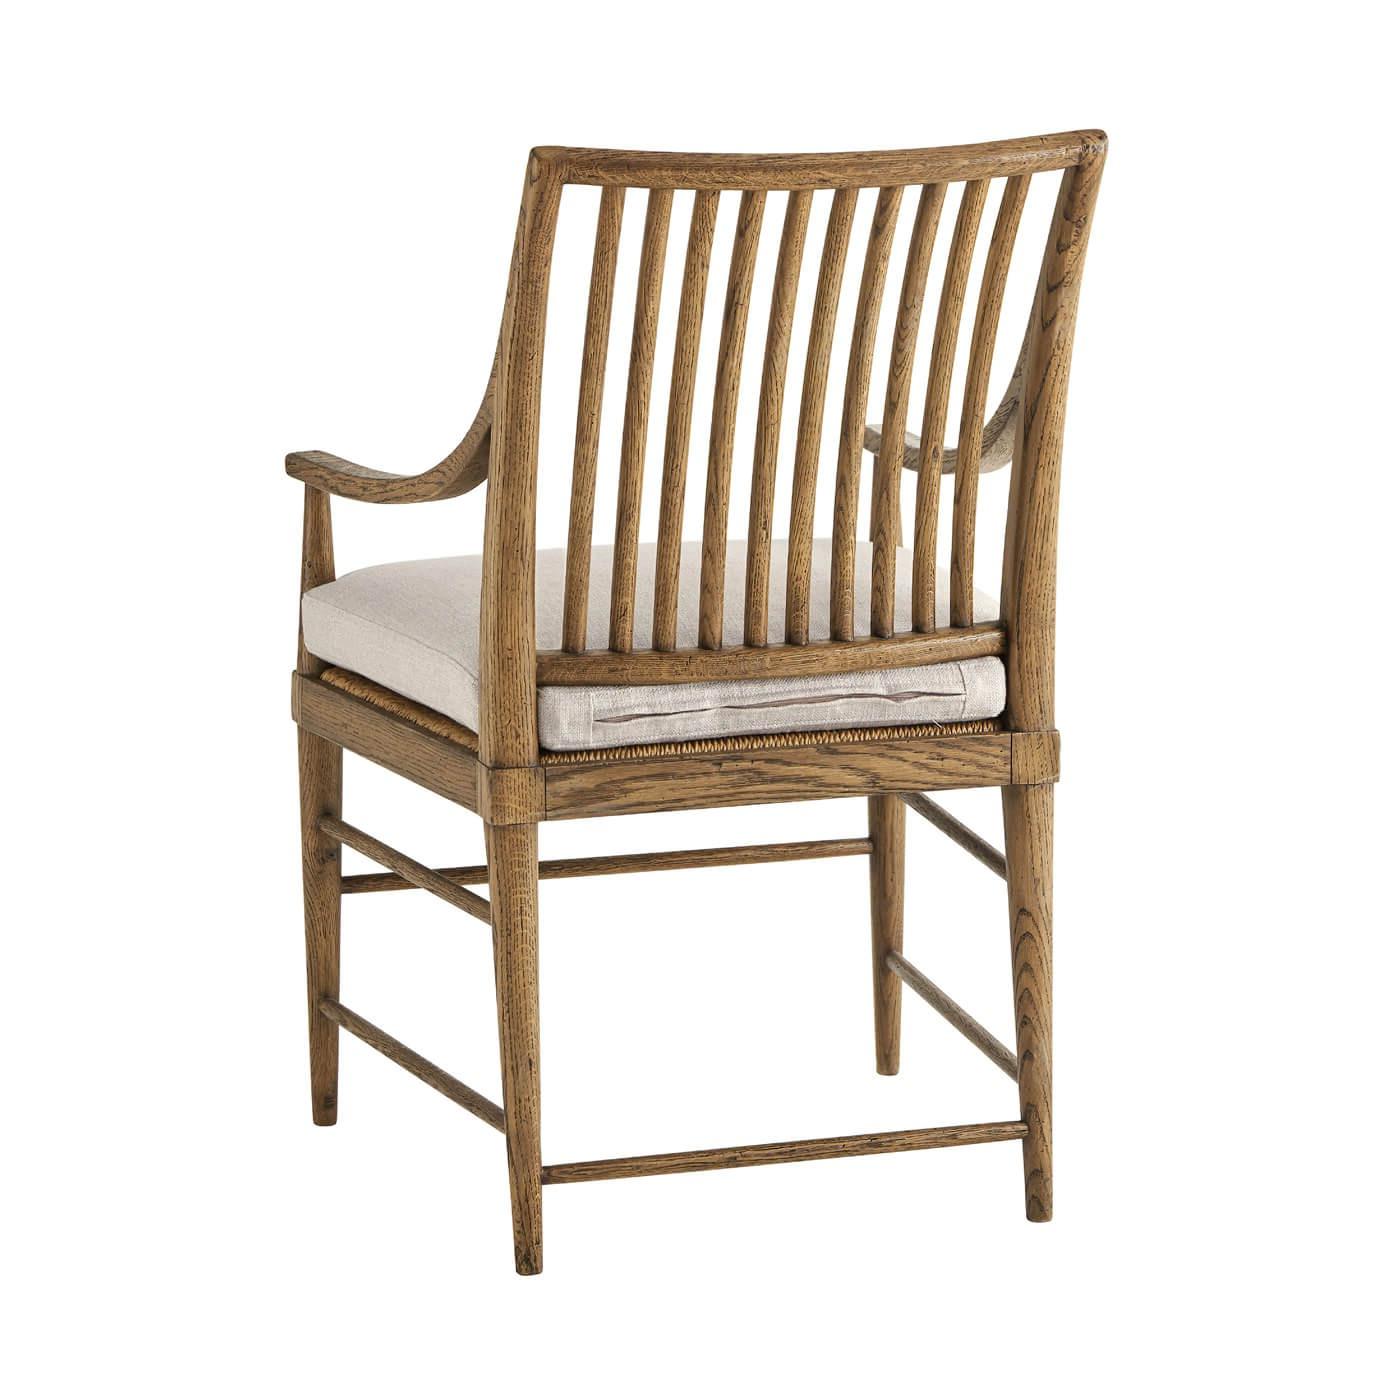 A Modern light oak slat-back dining armchair with tapered oak legs. This beautiful chair is crafted with rustic oak veneer, it has a slatted backrest, caned and loosely cushioned.

Shown in Dawn Finish
Shown in Linen-UP5409